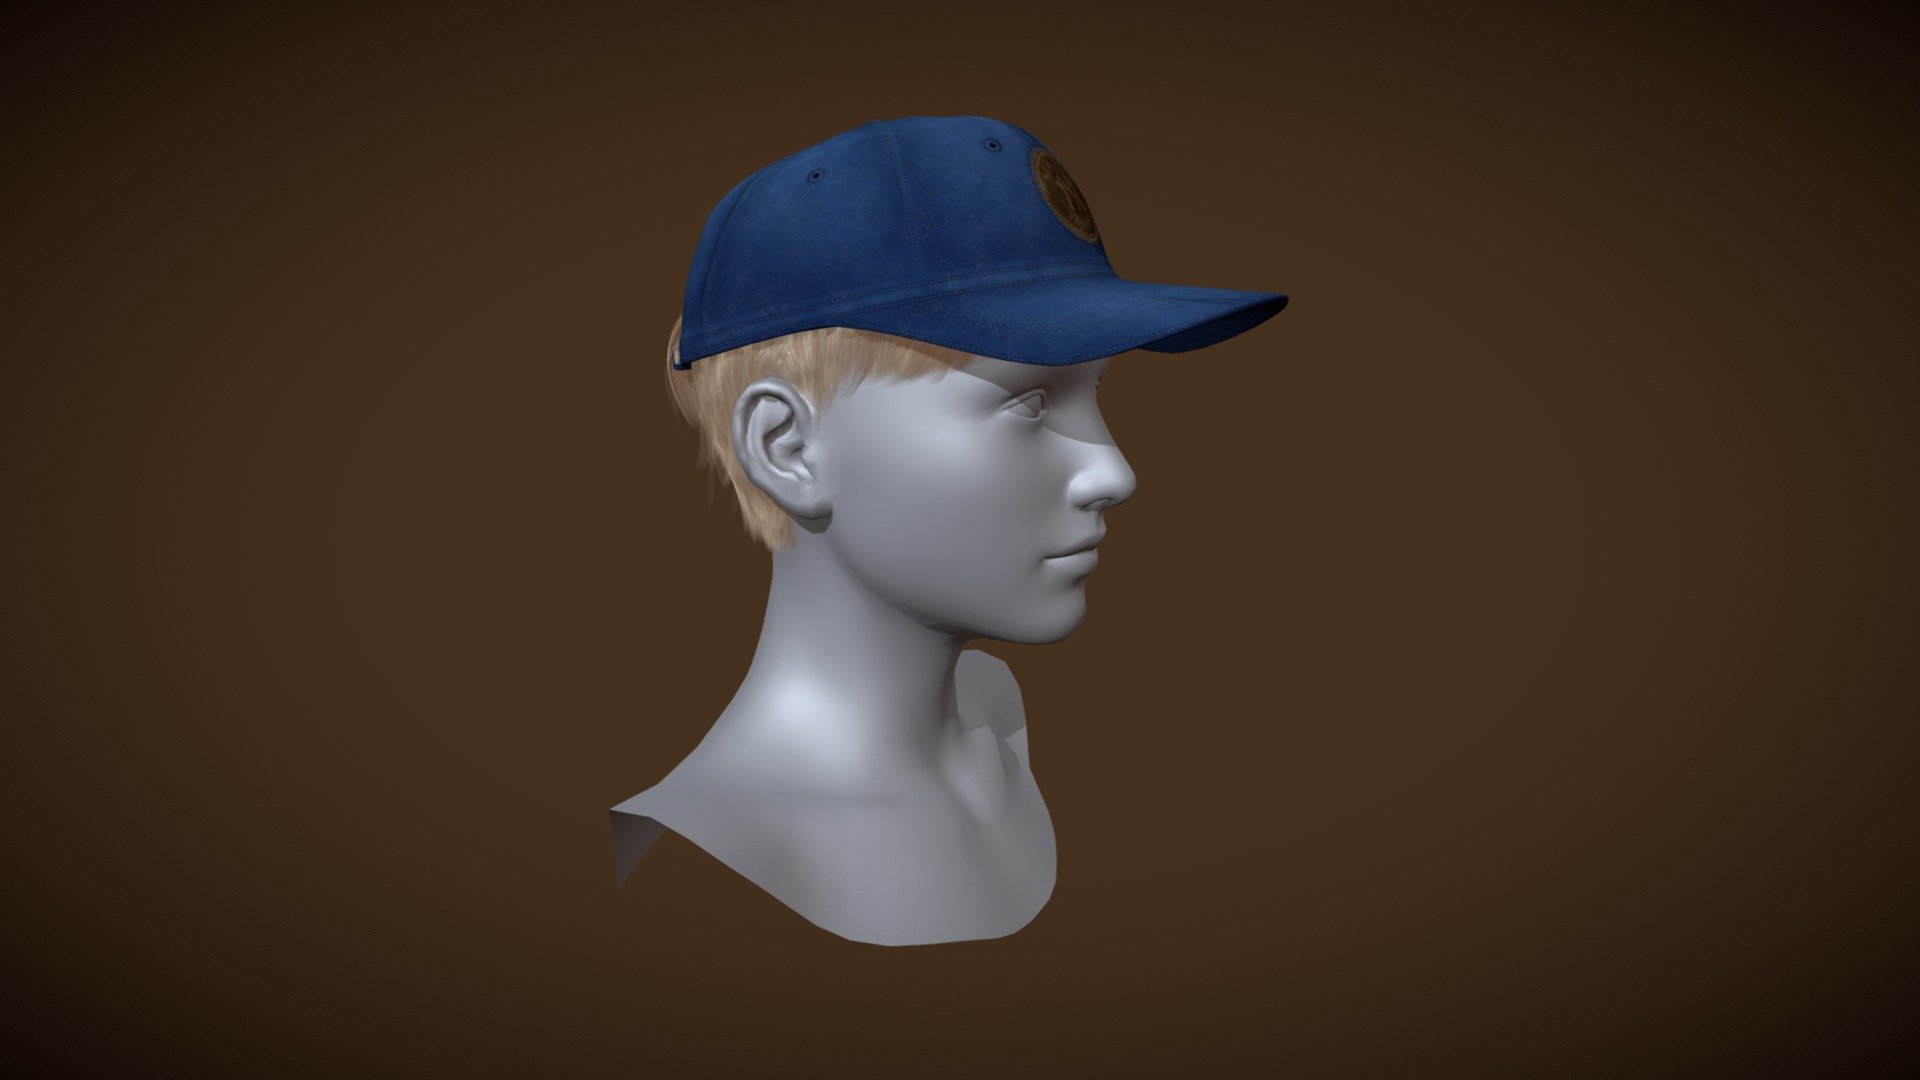 Usual baseball cap. Low poly - 998 quads.

First attempt at building hair with a mesh. Medium poly - approx. 38.000 quads.

The head was taken from the DAZ 3D Genesis 8 Female model 3d model